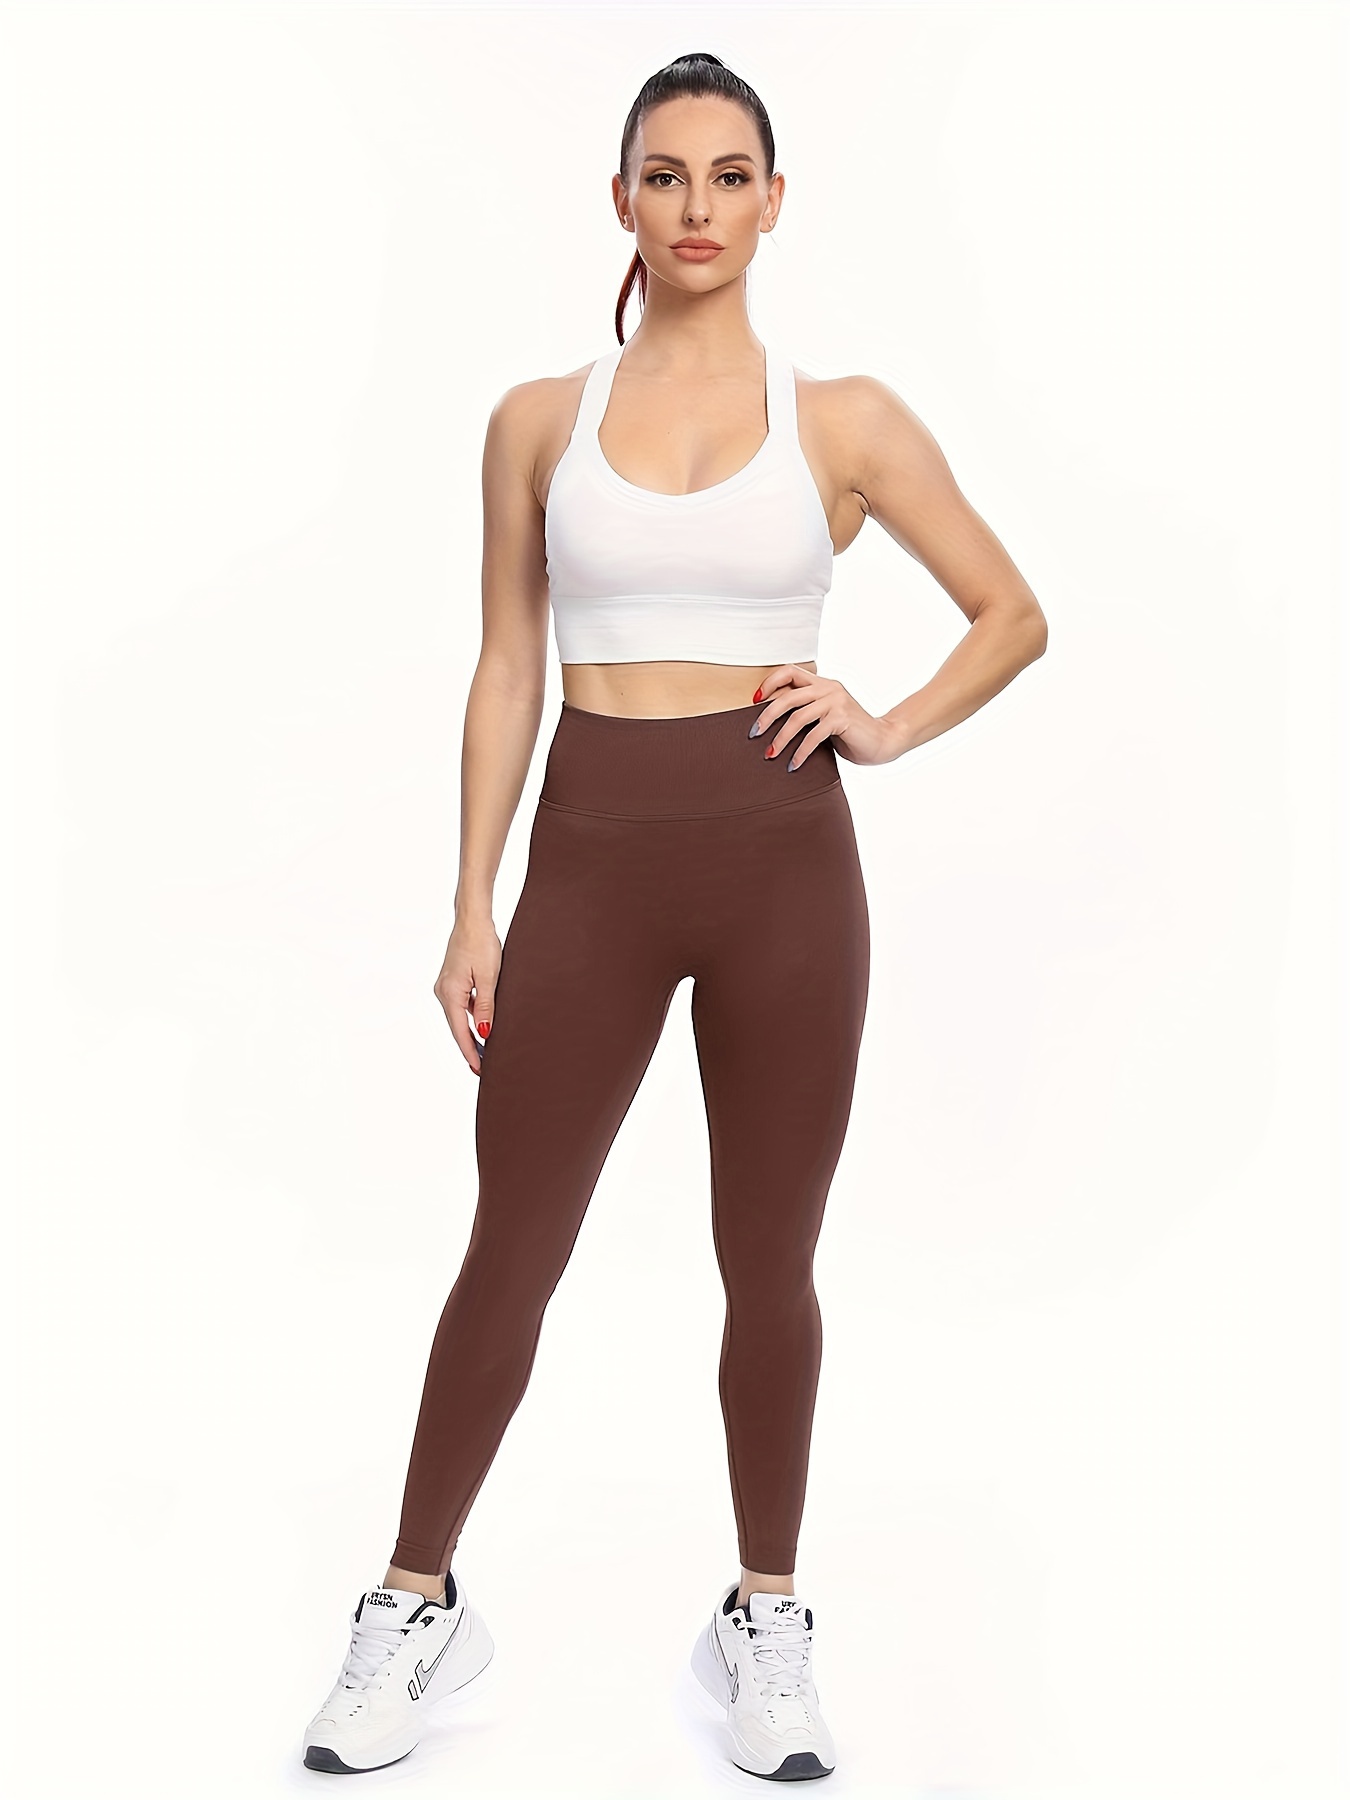 Cute Booty Lounge Workout Leggings and Sports Bra Review